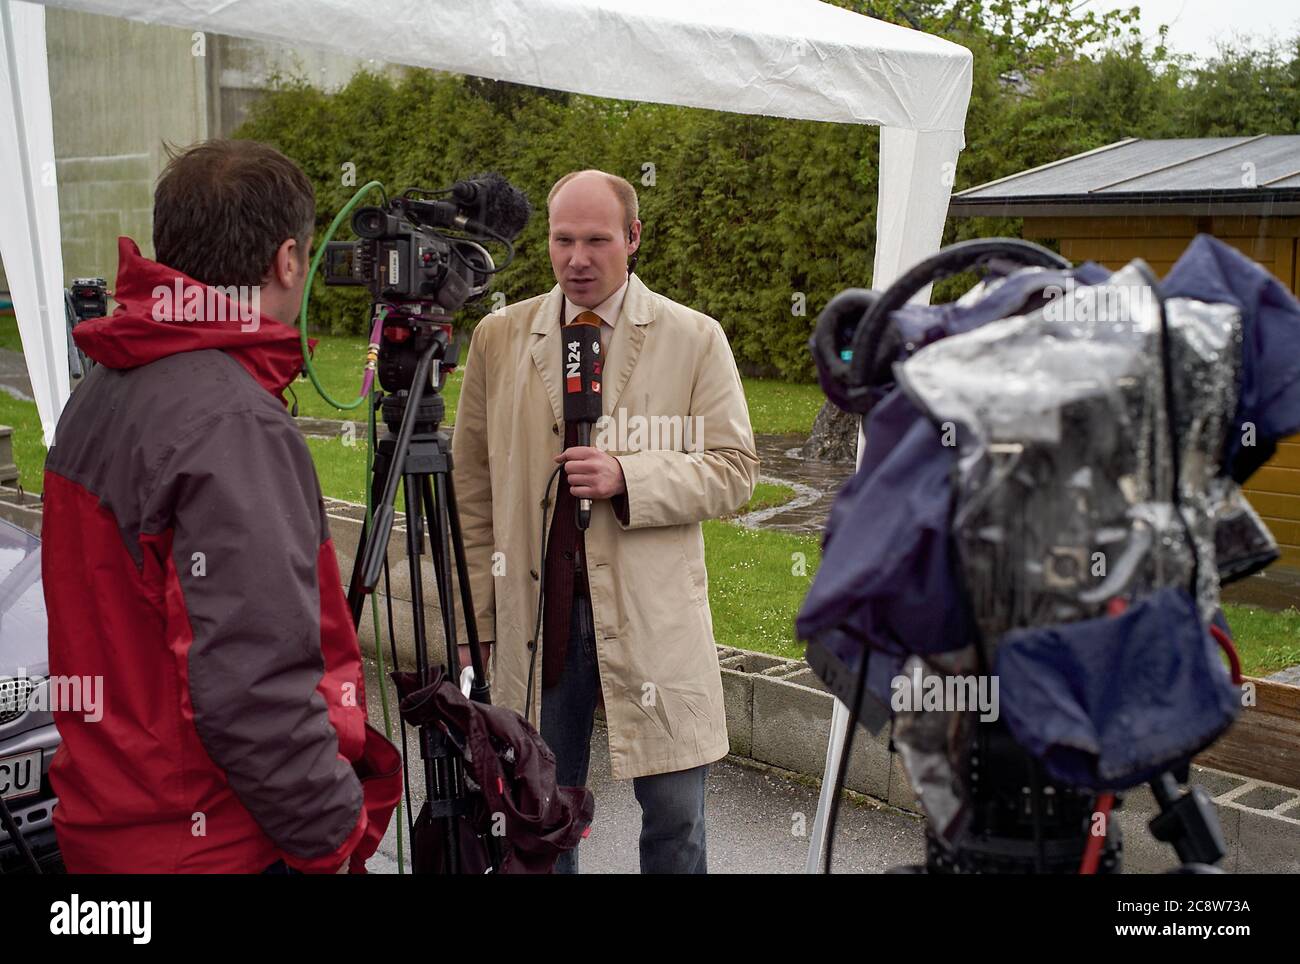 Amstetten, Austria - April 29 2008: TV News Reporter Moderating in the Pouring Rain on the Fritzl Cellar Case. Stock Photo